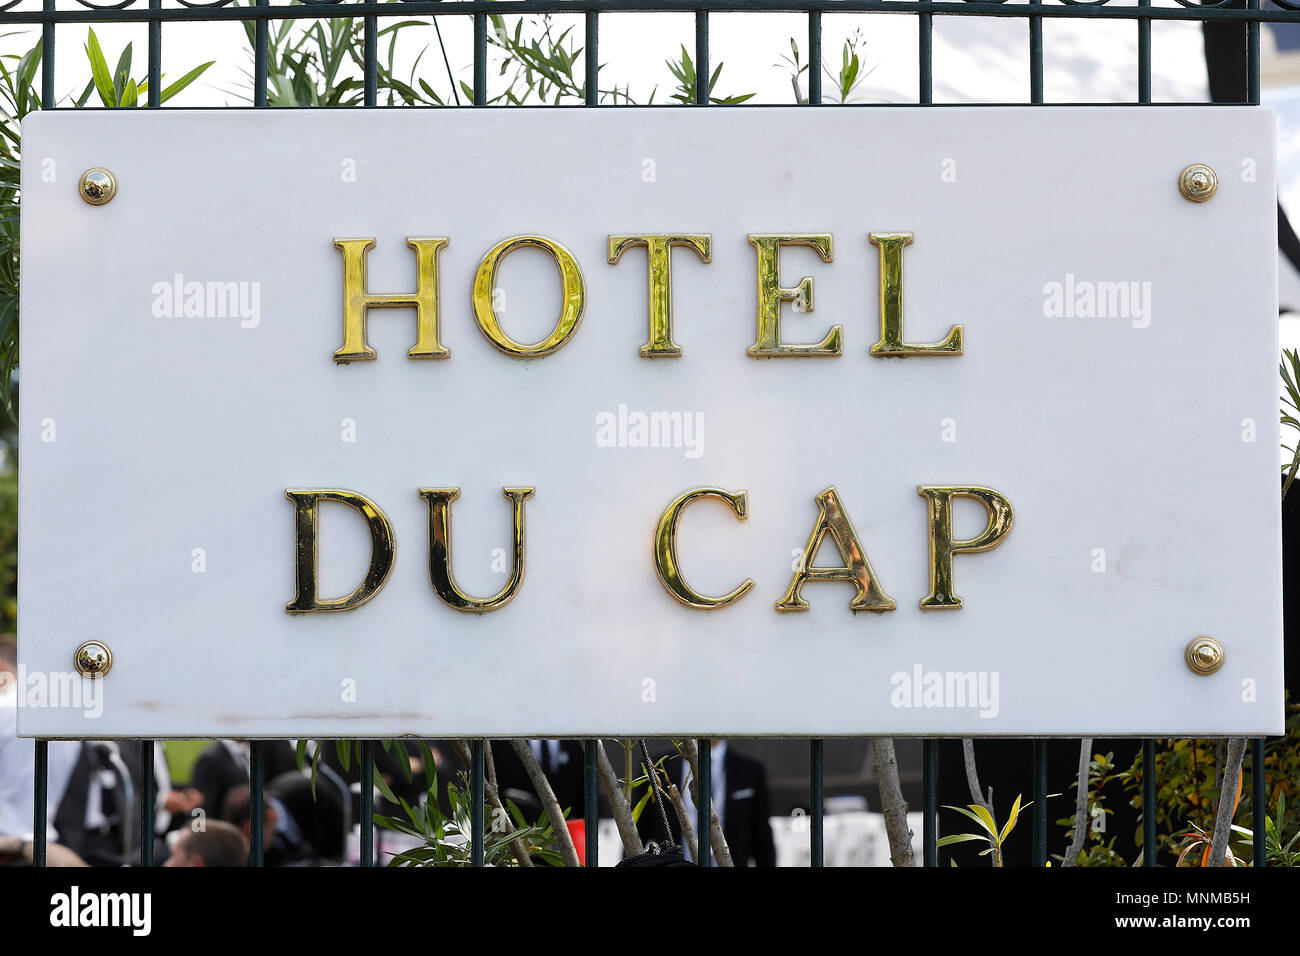 The sign at the amfAR 25th Annual Cinema Against AIDS gala at the Hotel du Cap-Eden-Roc in Cap d'Antibes, France, during the 71st Cannes Film Festival in Cannes, France. Credit: John Rasimus / Media Punch ***FRANCE, SWEDEN, NORWAY, DENARK, FINLAND, USA, CZECH REPUBLIC, SOUTH AMERICA ONLY*** Stock Photo